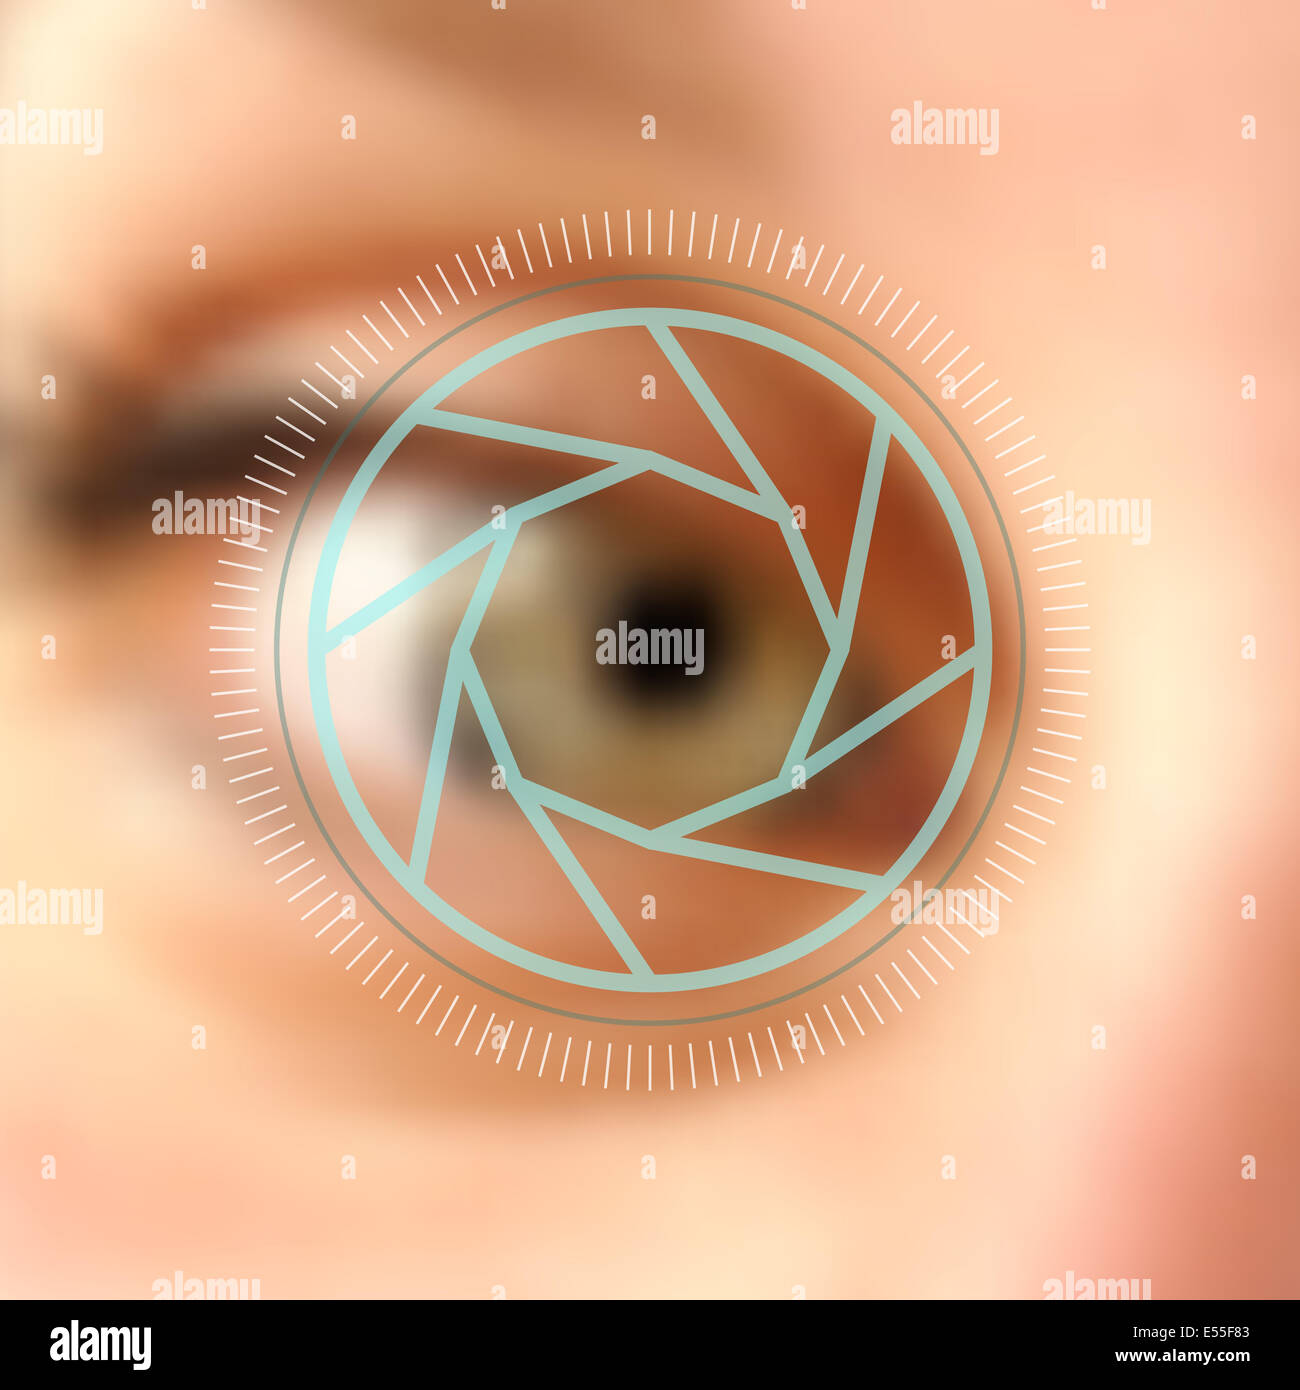 Digital photography human eye camera lens concept background. EPS10 vector file with  blurred effect and transparency layers. Stock Photo